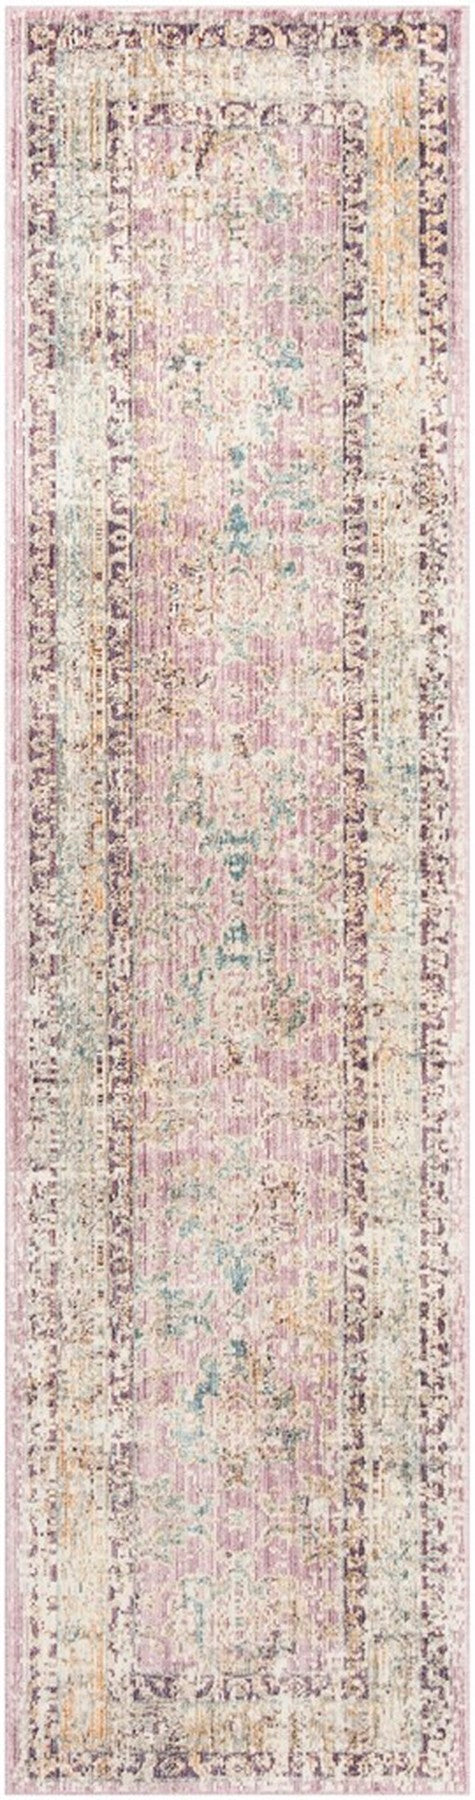 Safavieh Illusion Power Loomed Cotton Backing Rugs In Rose / Light Grey